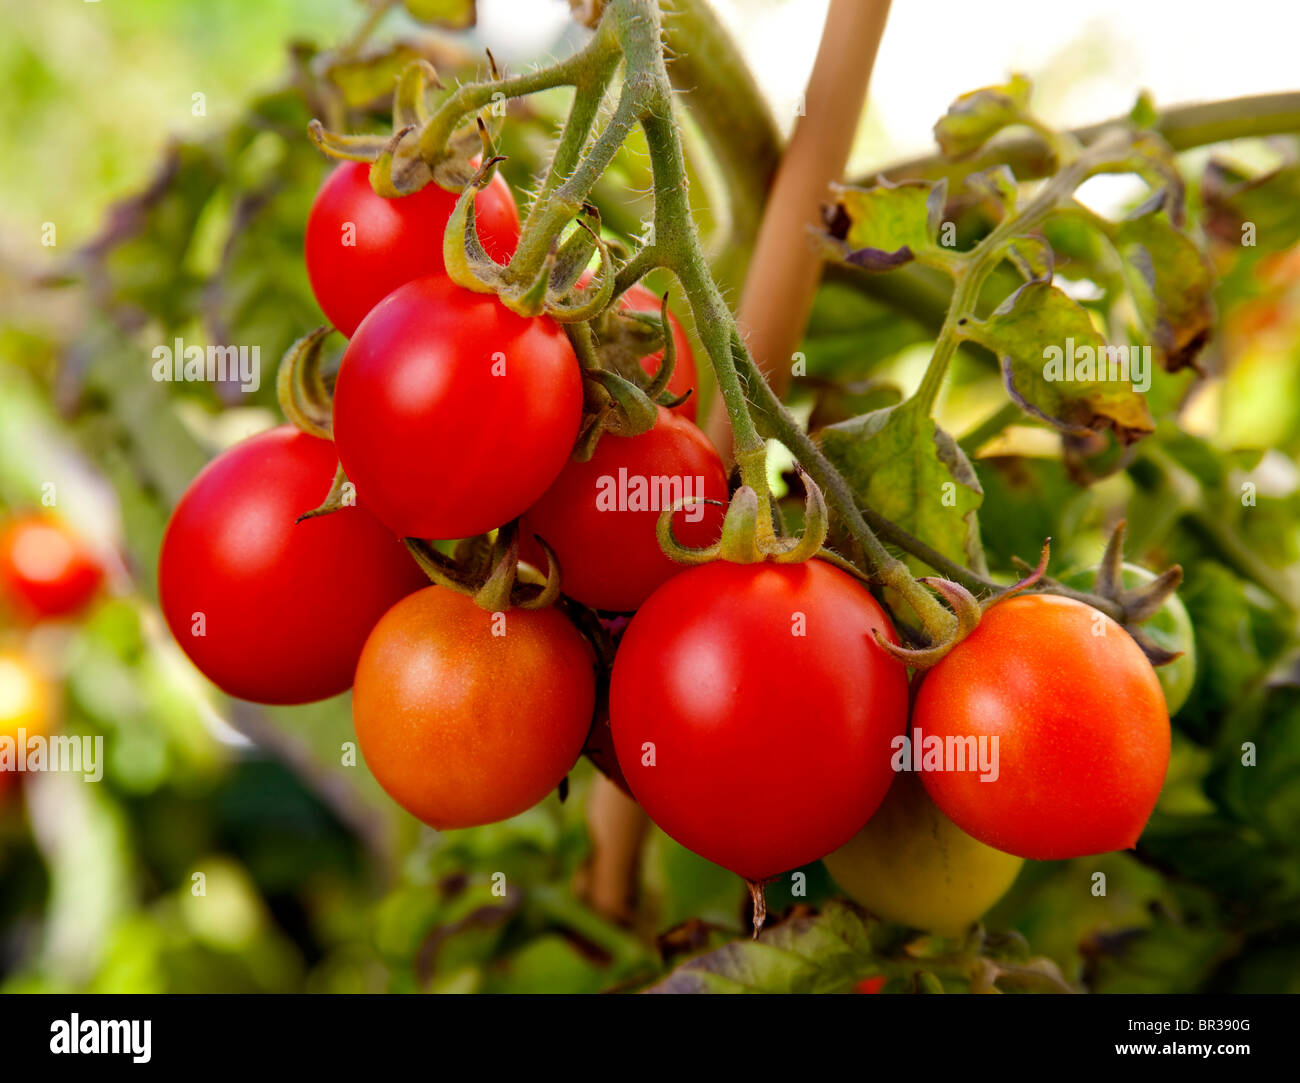 bunch of red ripe tomatoes Stock Photo